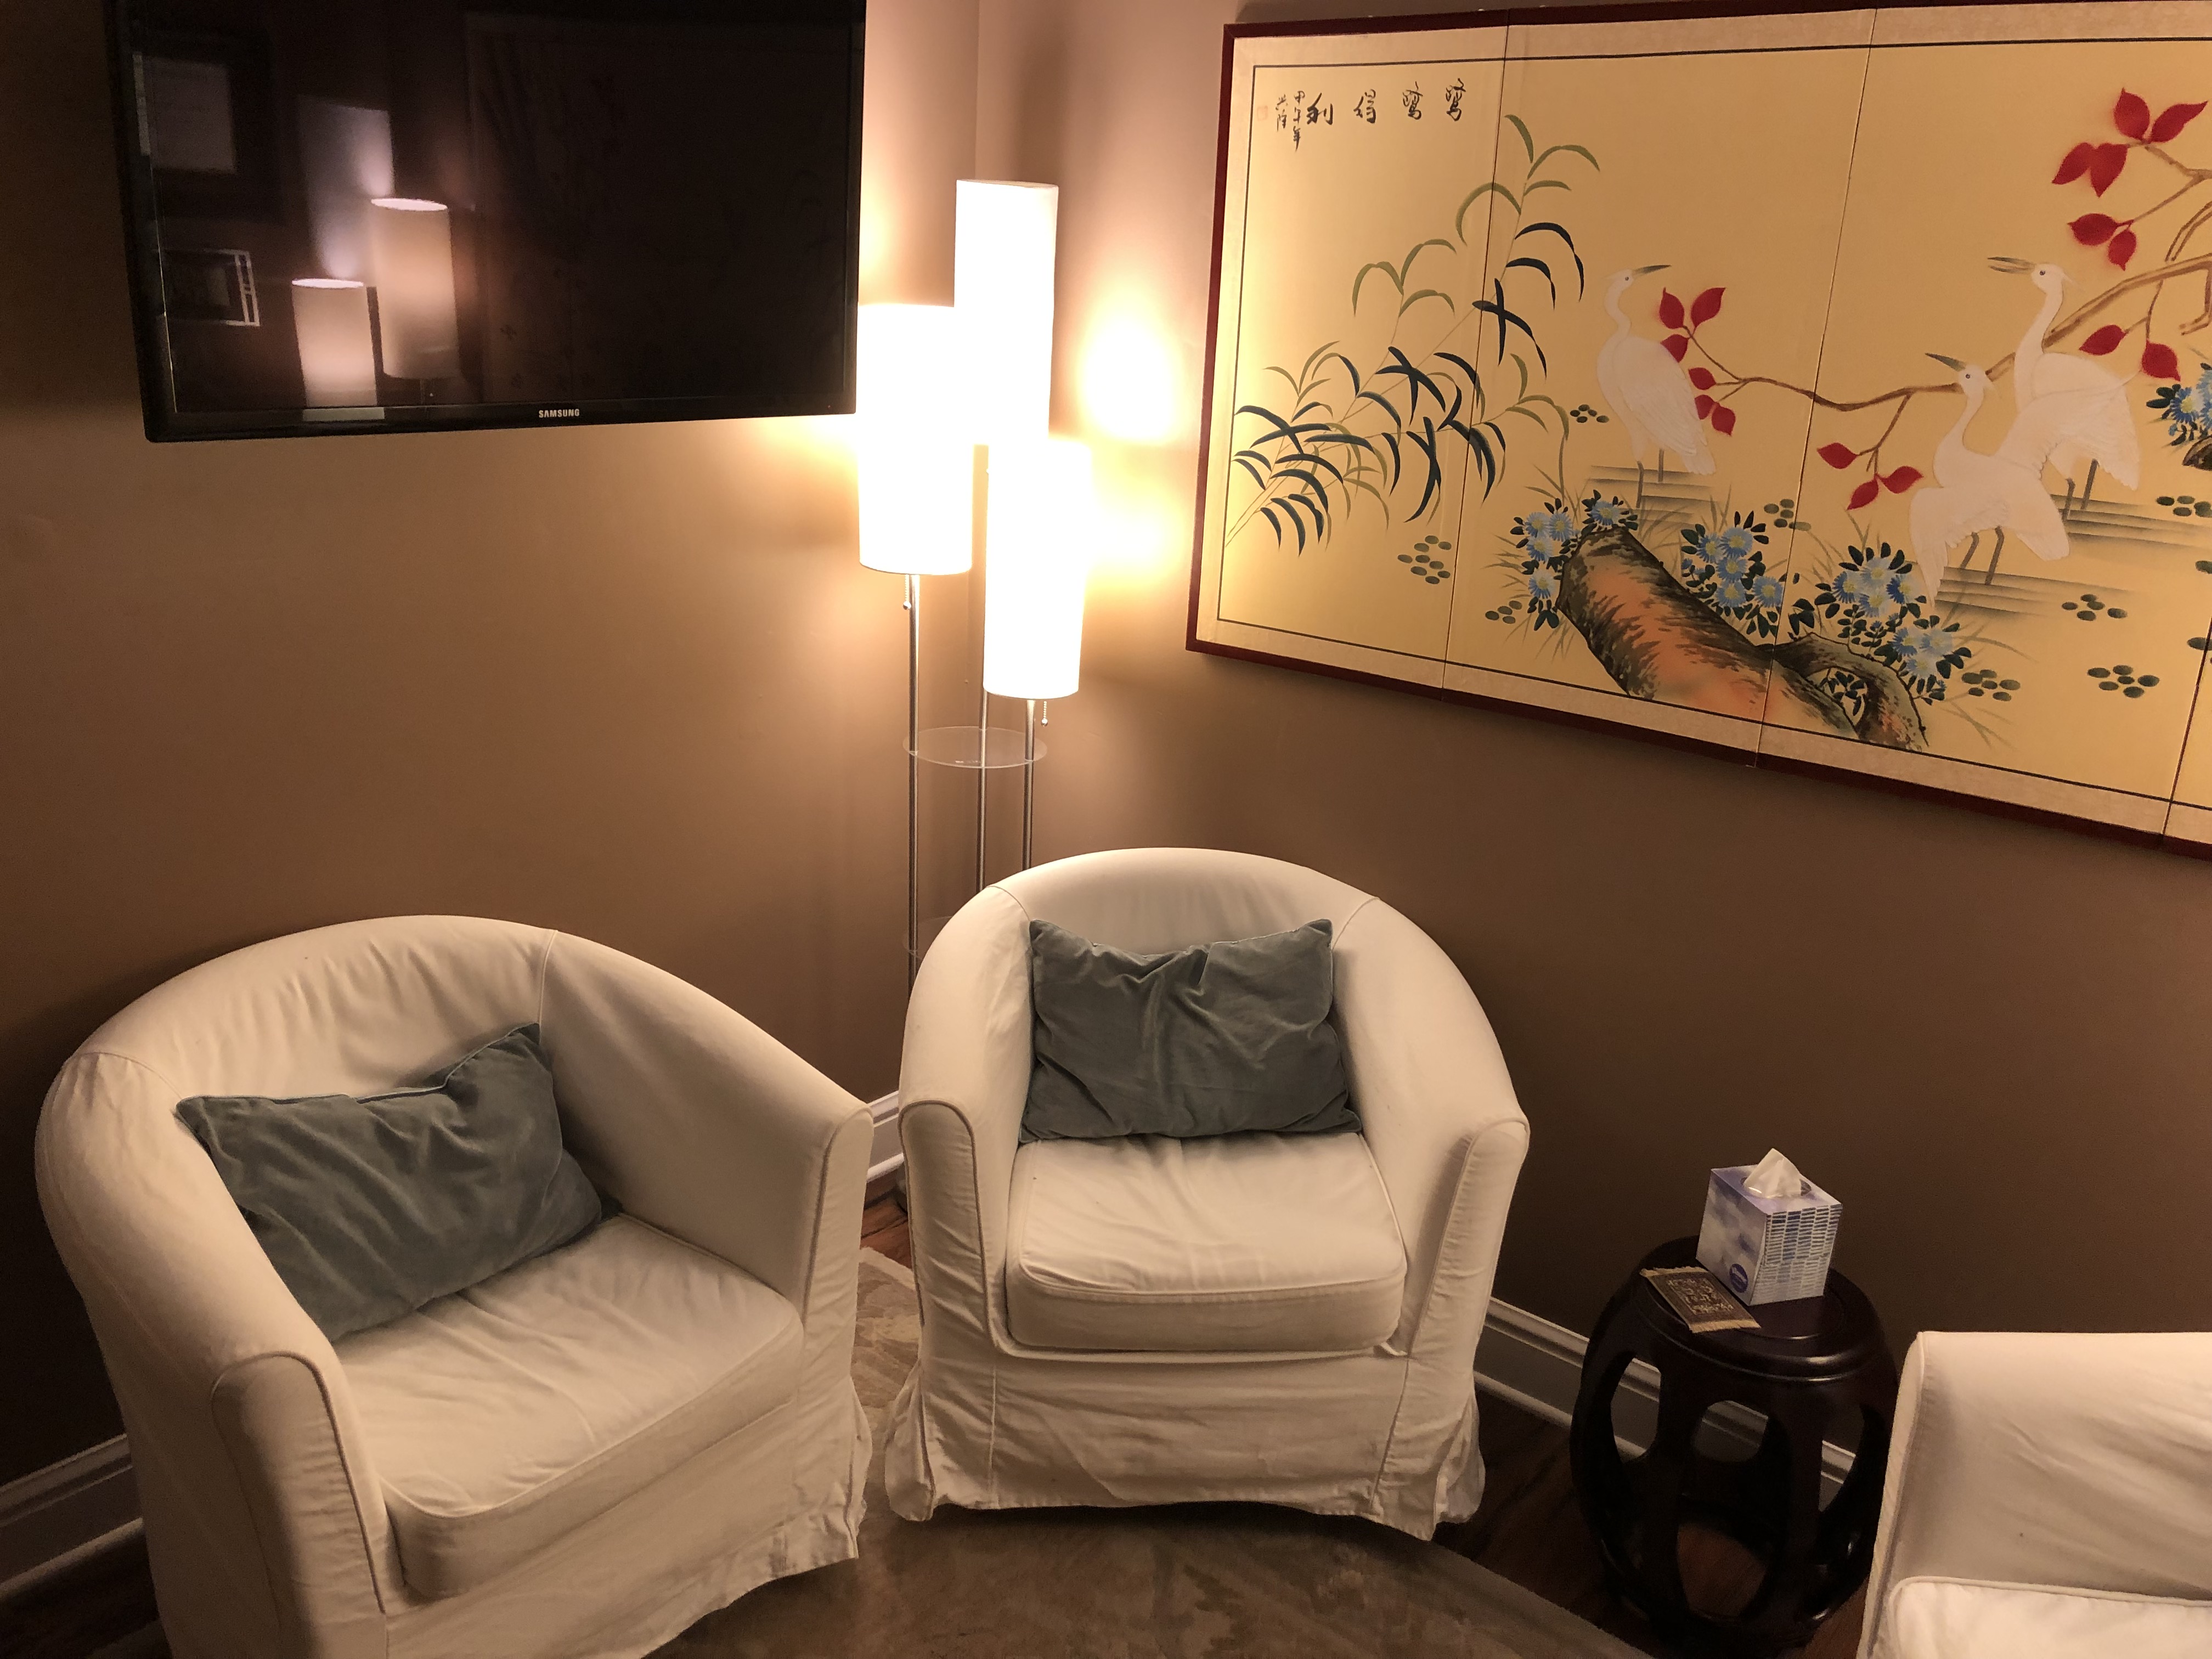 We strive to make your experience at Orenda Counseling Center warm, comfortable, and peaceful.